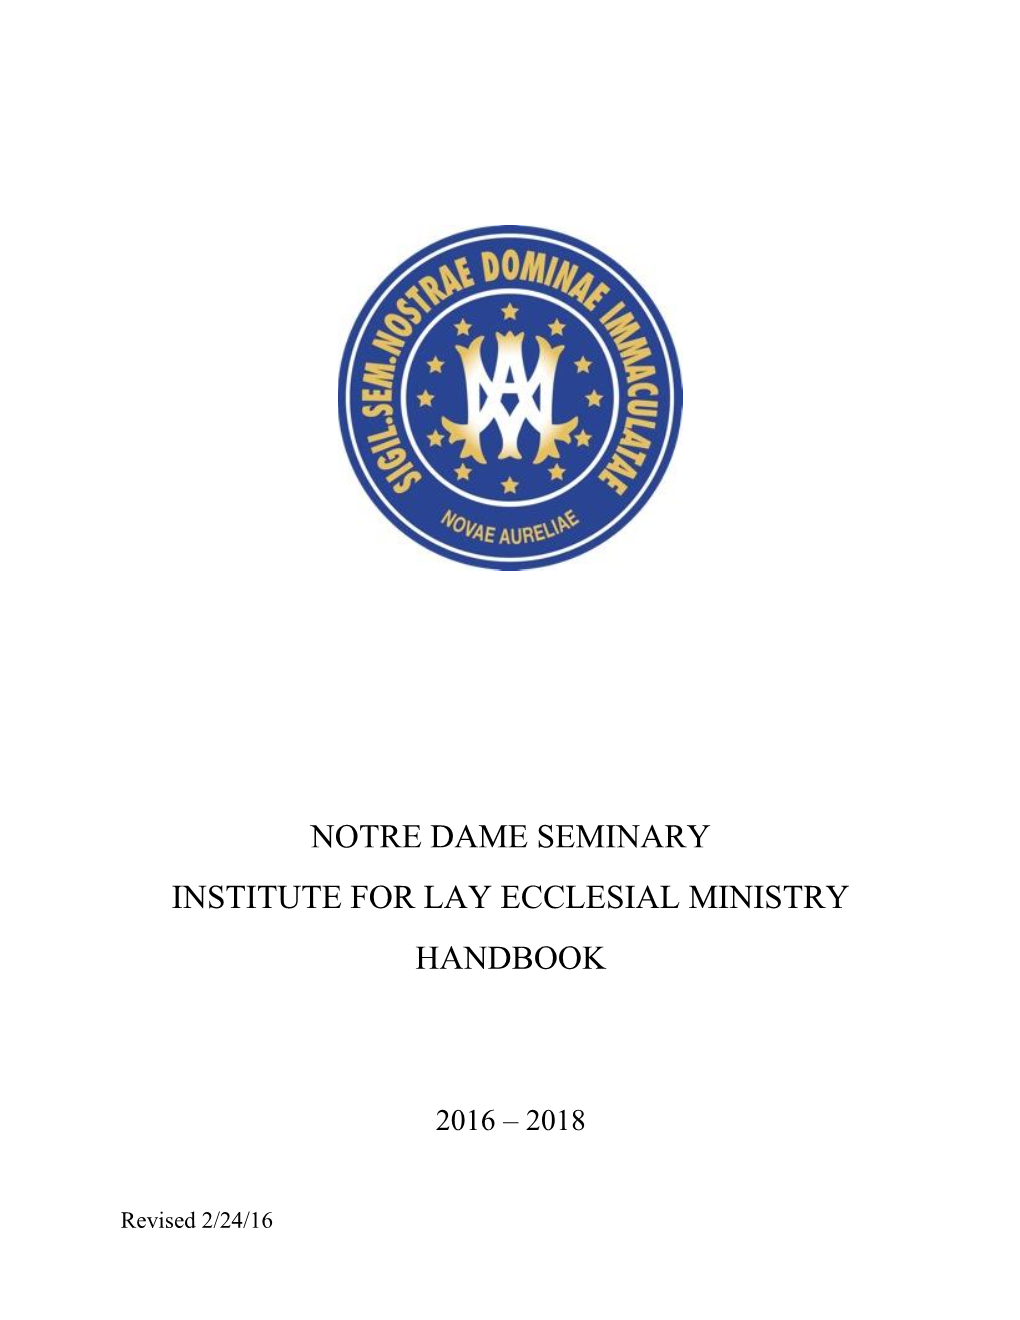 Notre Dame Seminary Institute for Lay Ecclesial Ministry Handbook